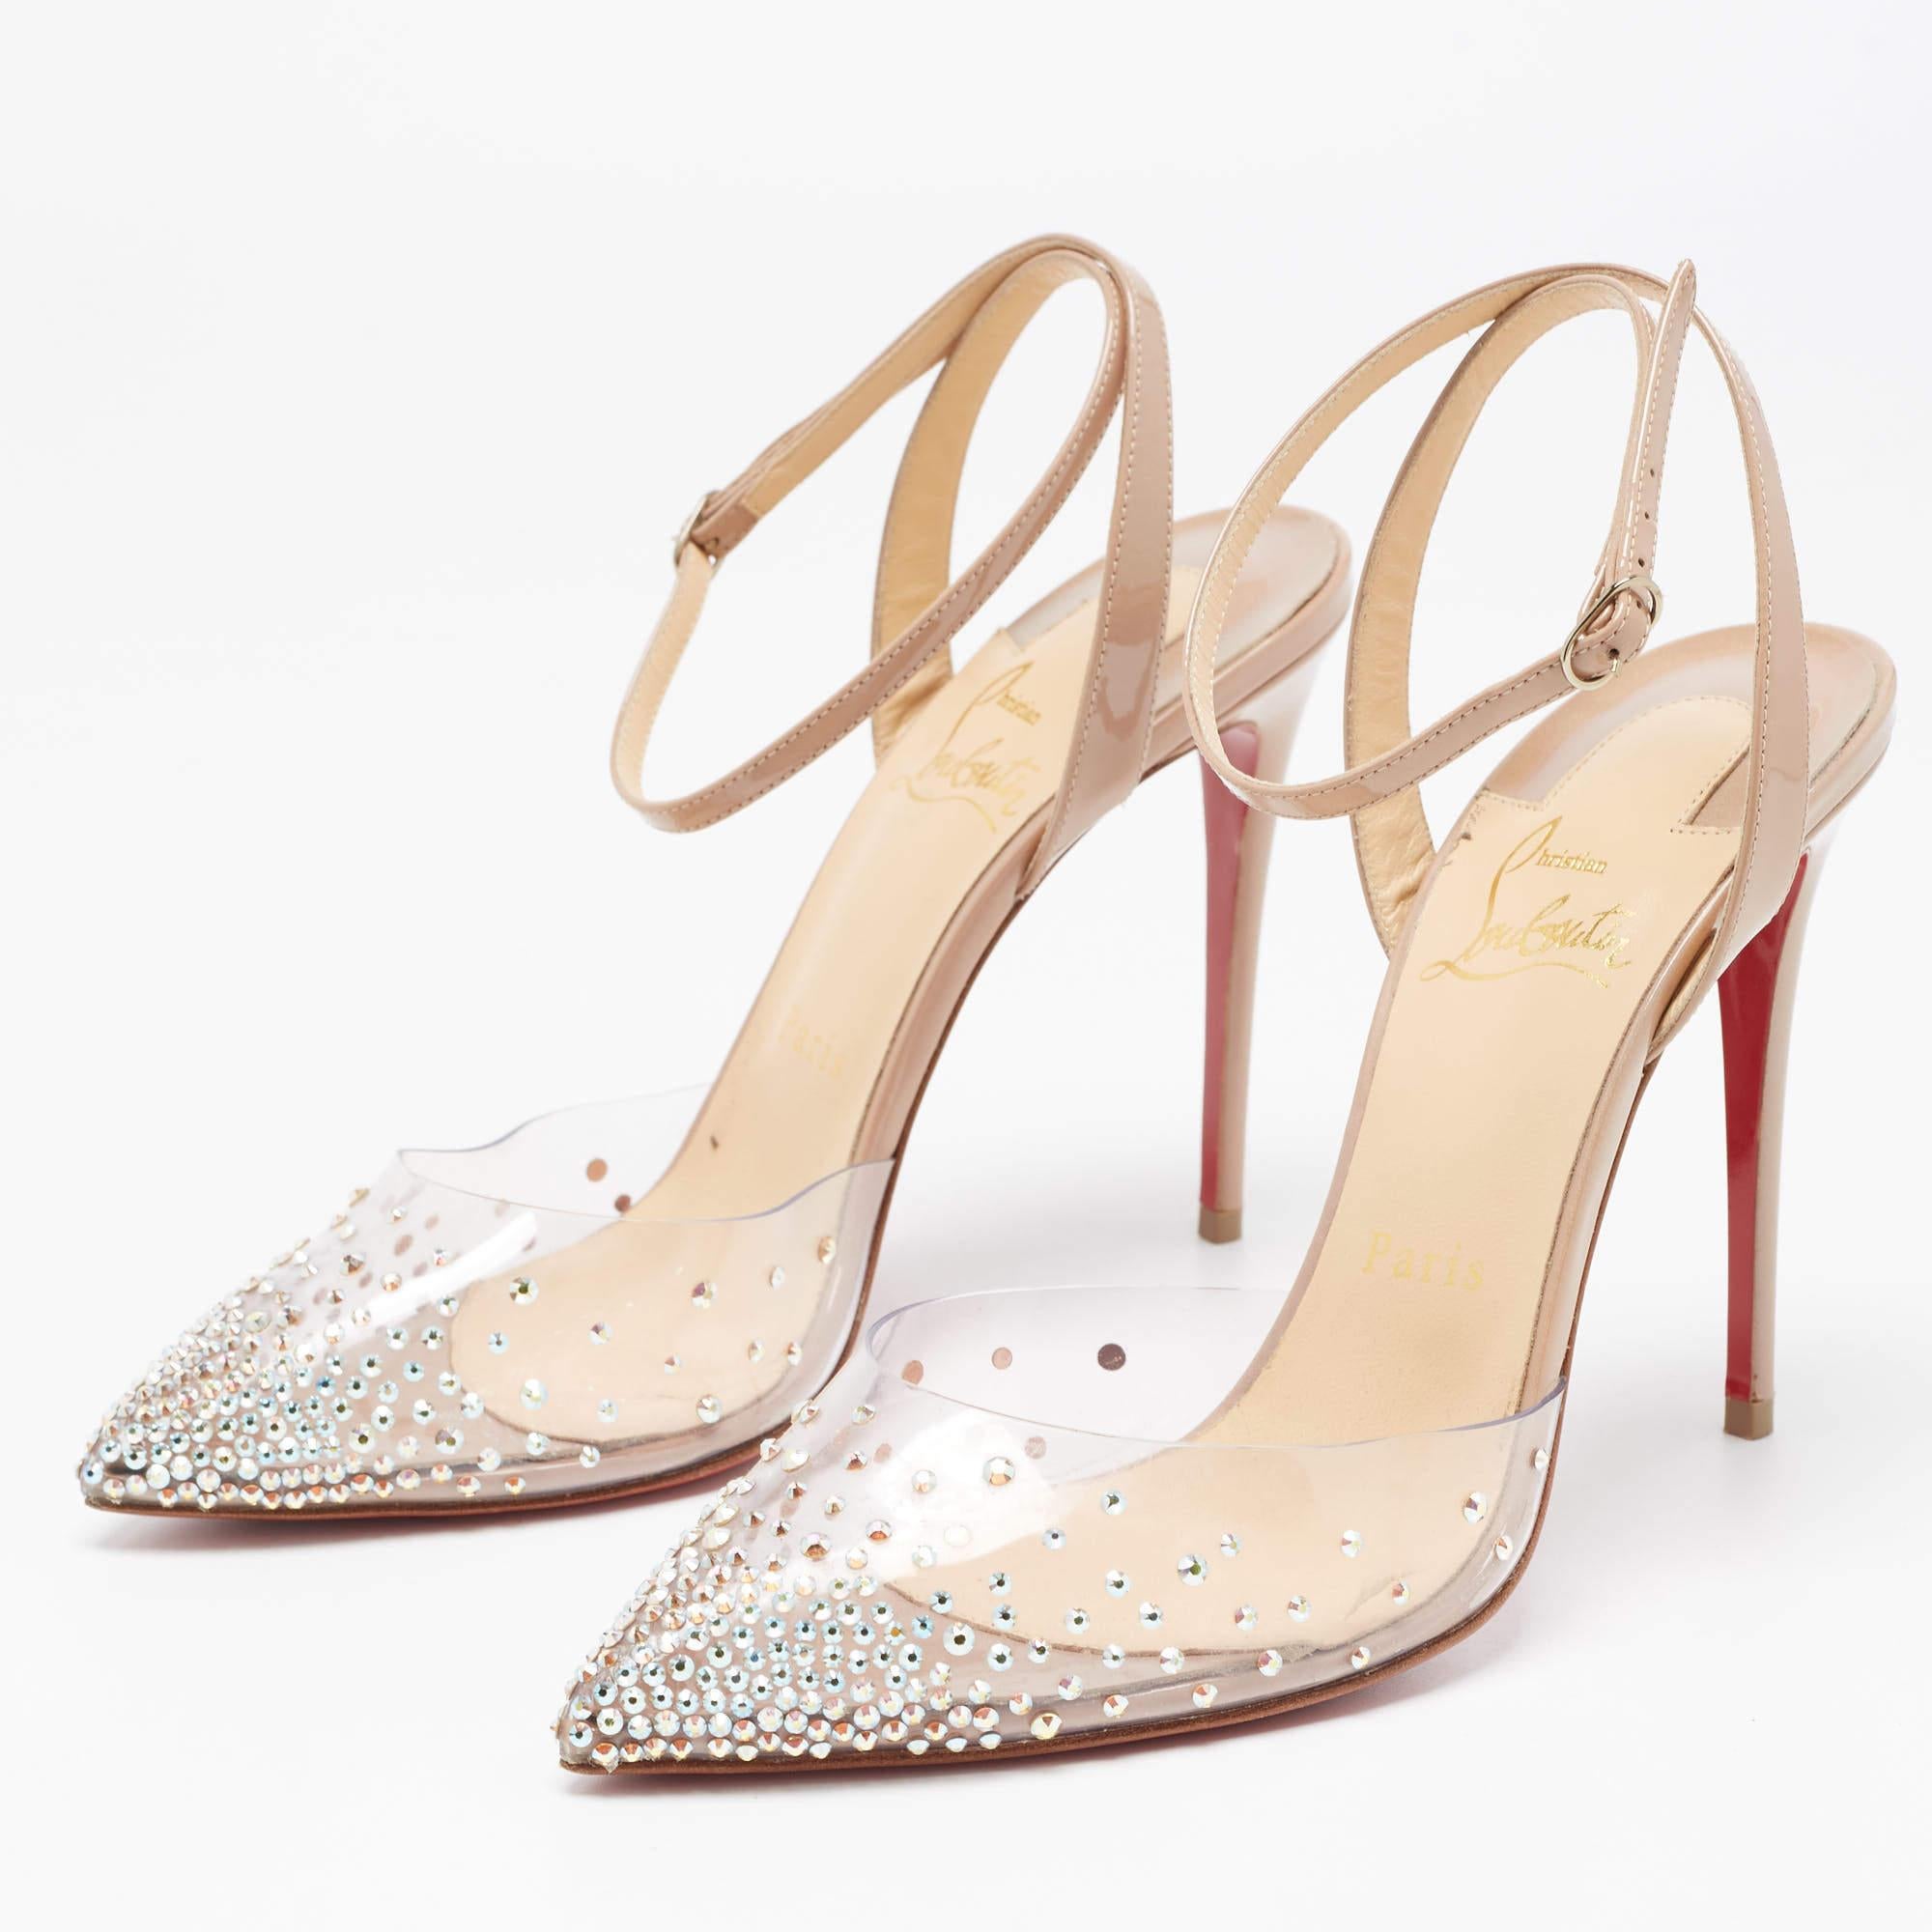 Christian Louboutin Beige Patent Leather and PVC Ankle Strap Pumps Size 37.5 For Sale 1